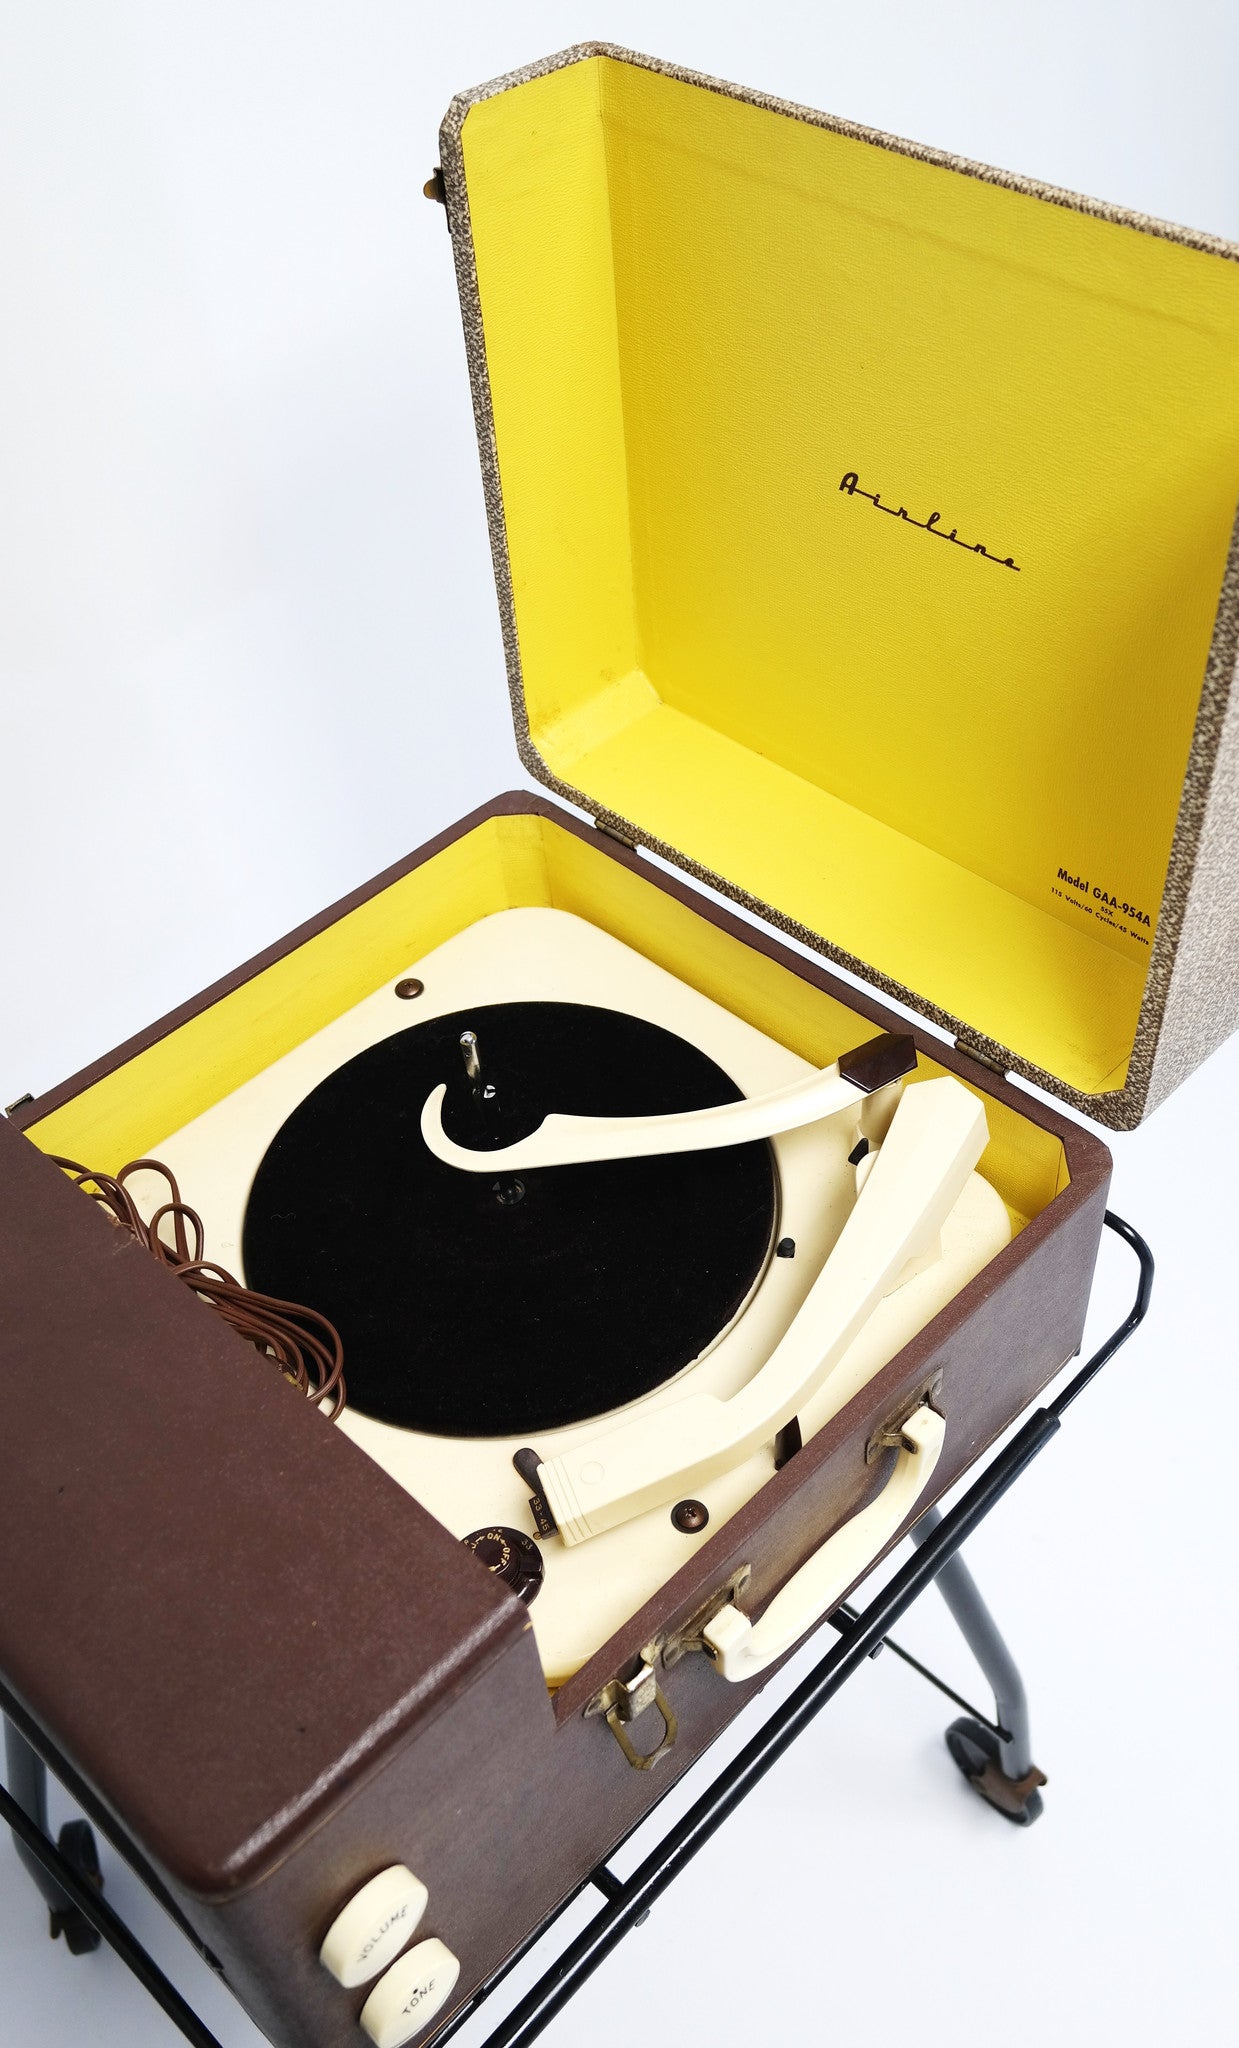 SOLD - Mid Century 50's Airline Portable Suitcase Record Player The Vintedge Co.